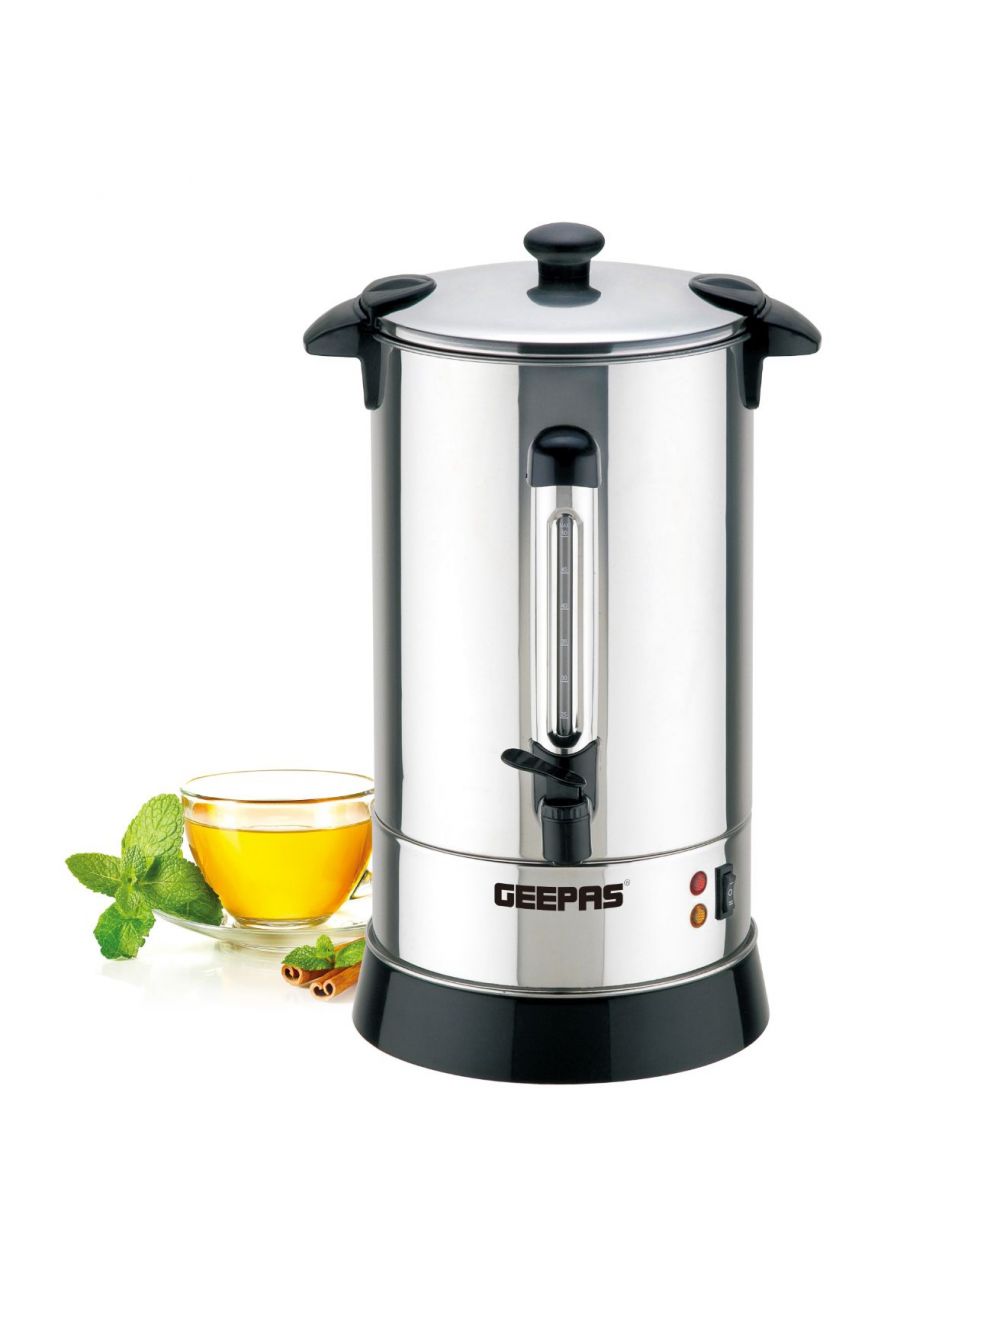 Geepas Stainless Steel Electric Kettle 15L GK5219 Silver